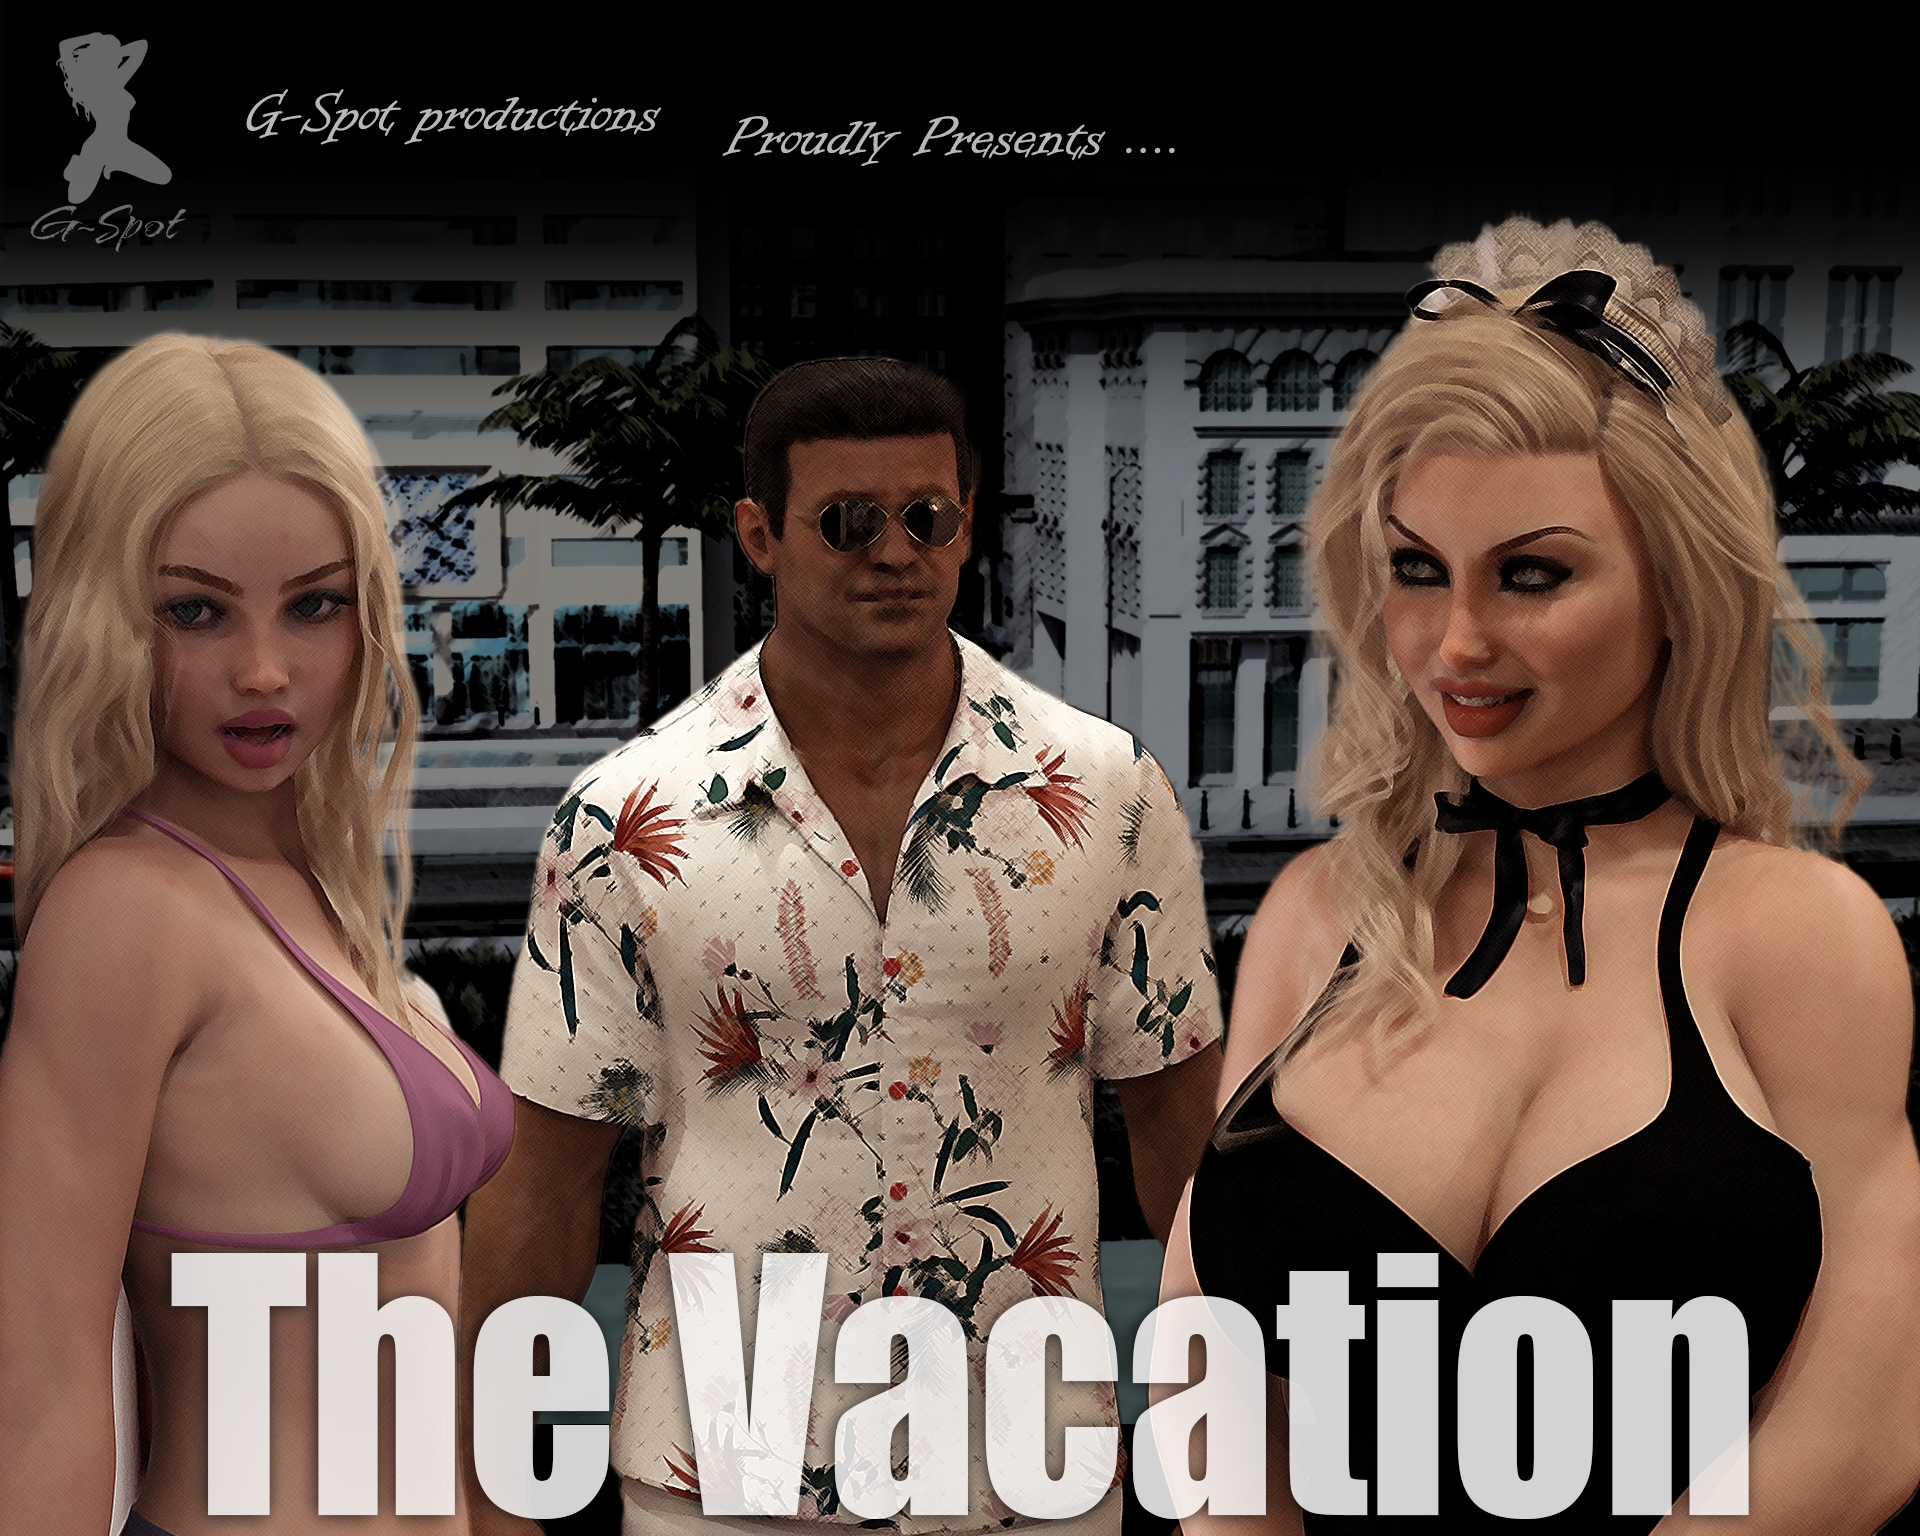 Come see this great comic!!! ♥ https://www.patreon.com/posts/vacation-93034064?